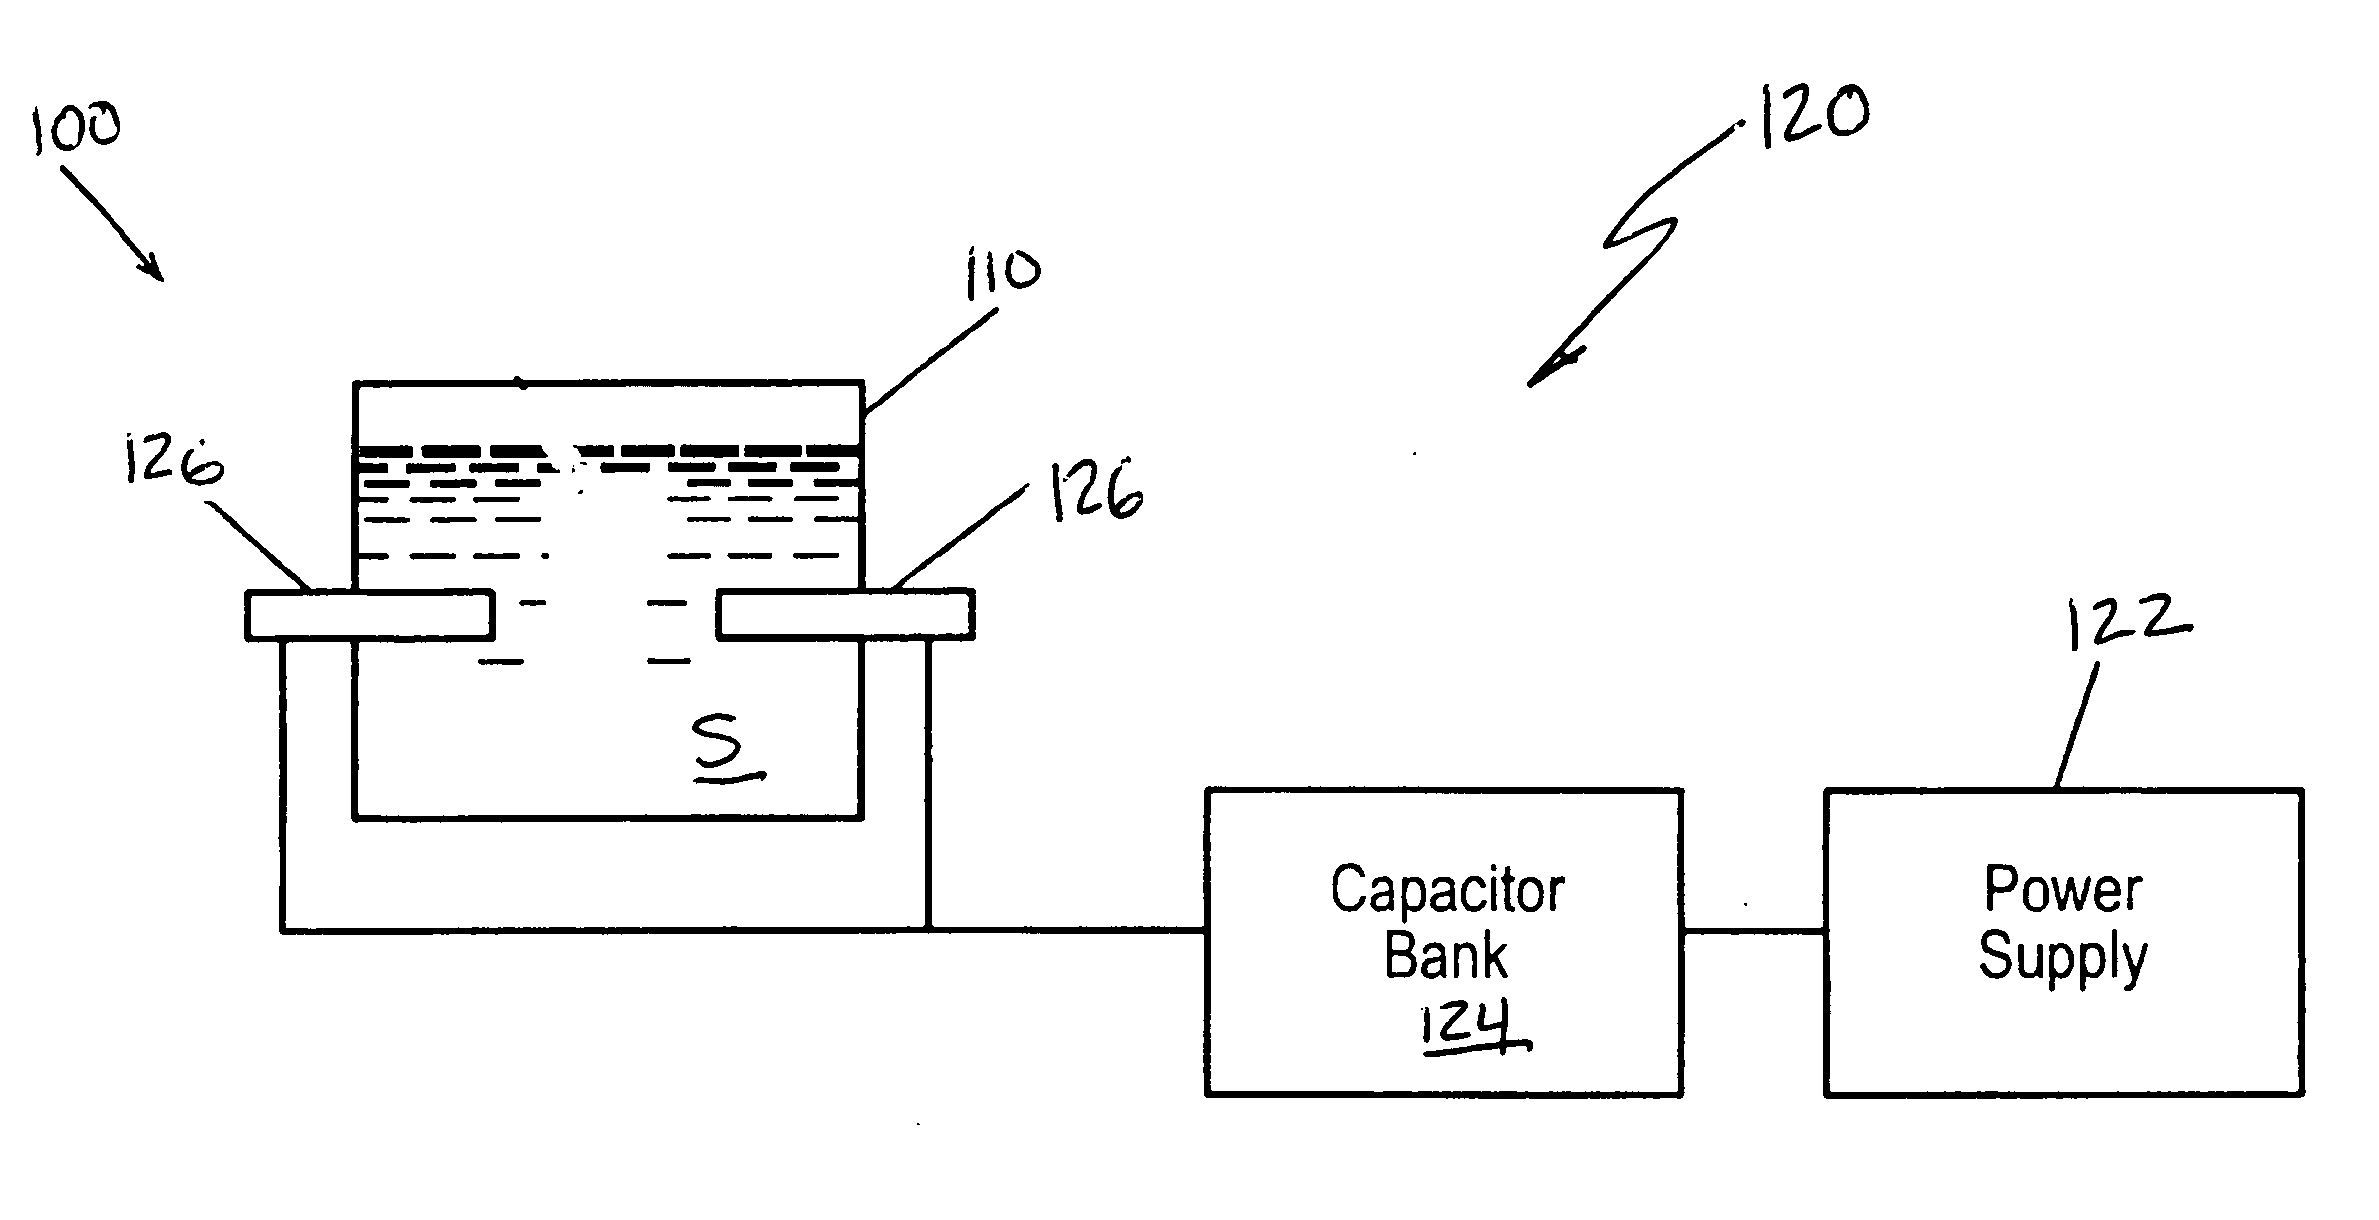 Spark-induced consolidation of sludge